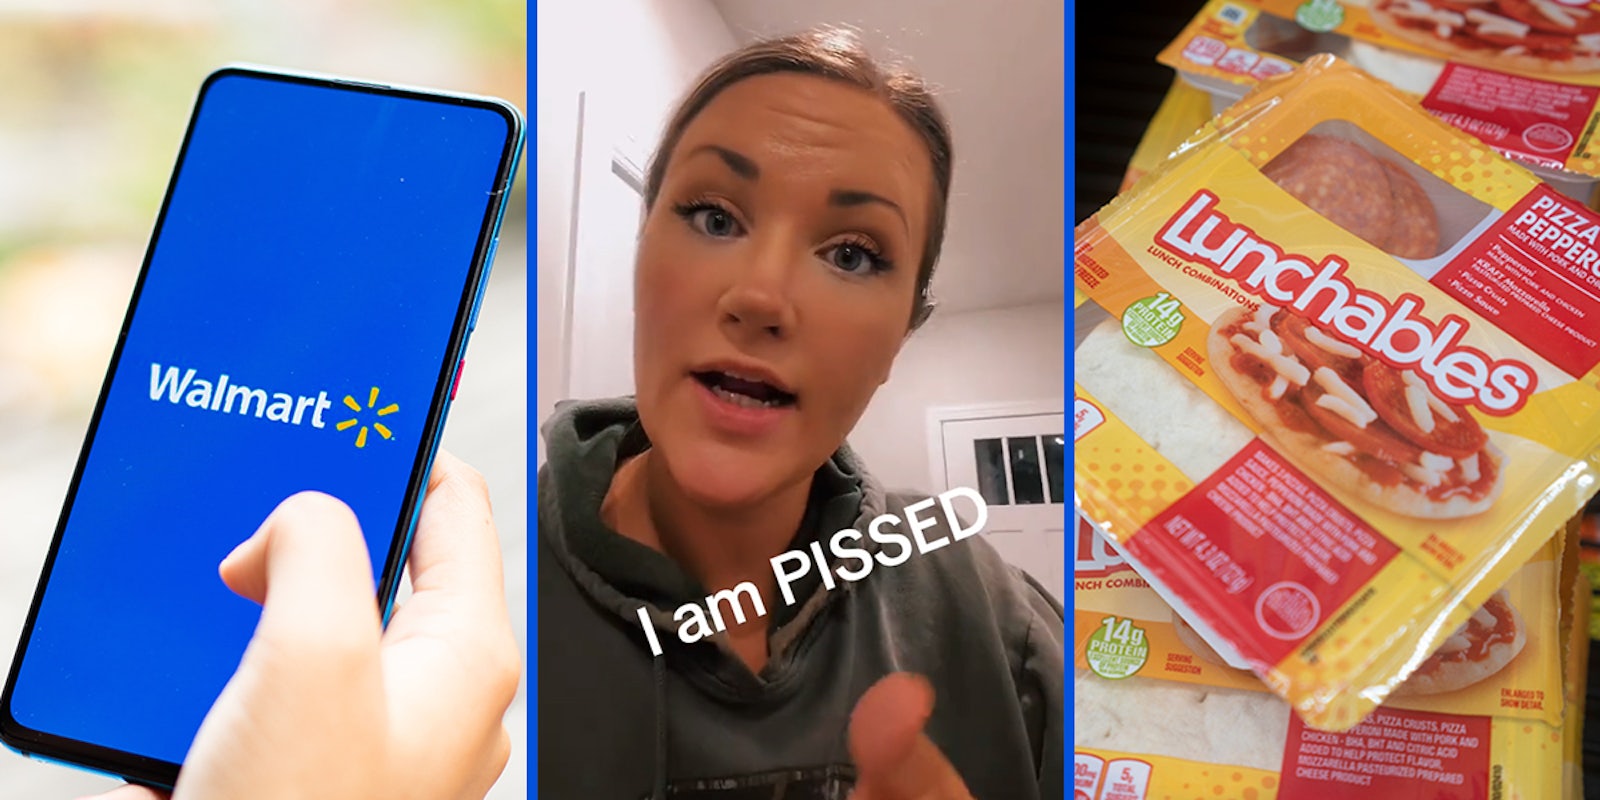 Walmart app on phone in hand (l) Walmart customer speaking with caption 'I am PISSED' (c) Lunchables (r)